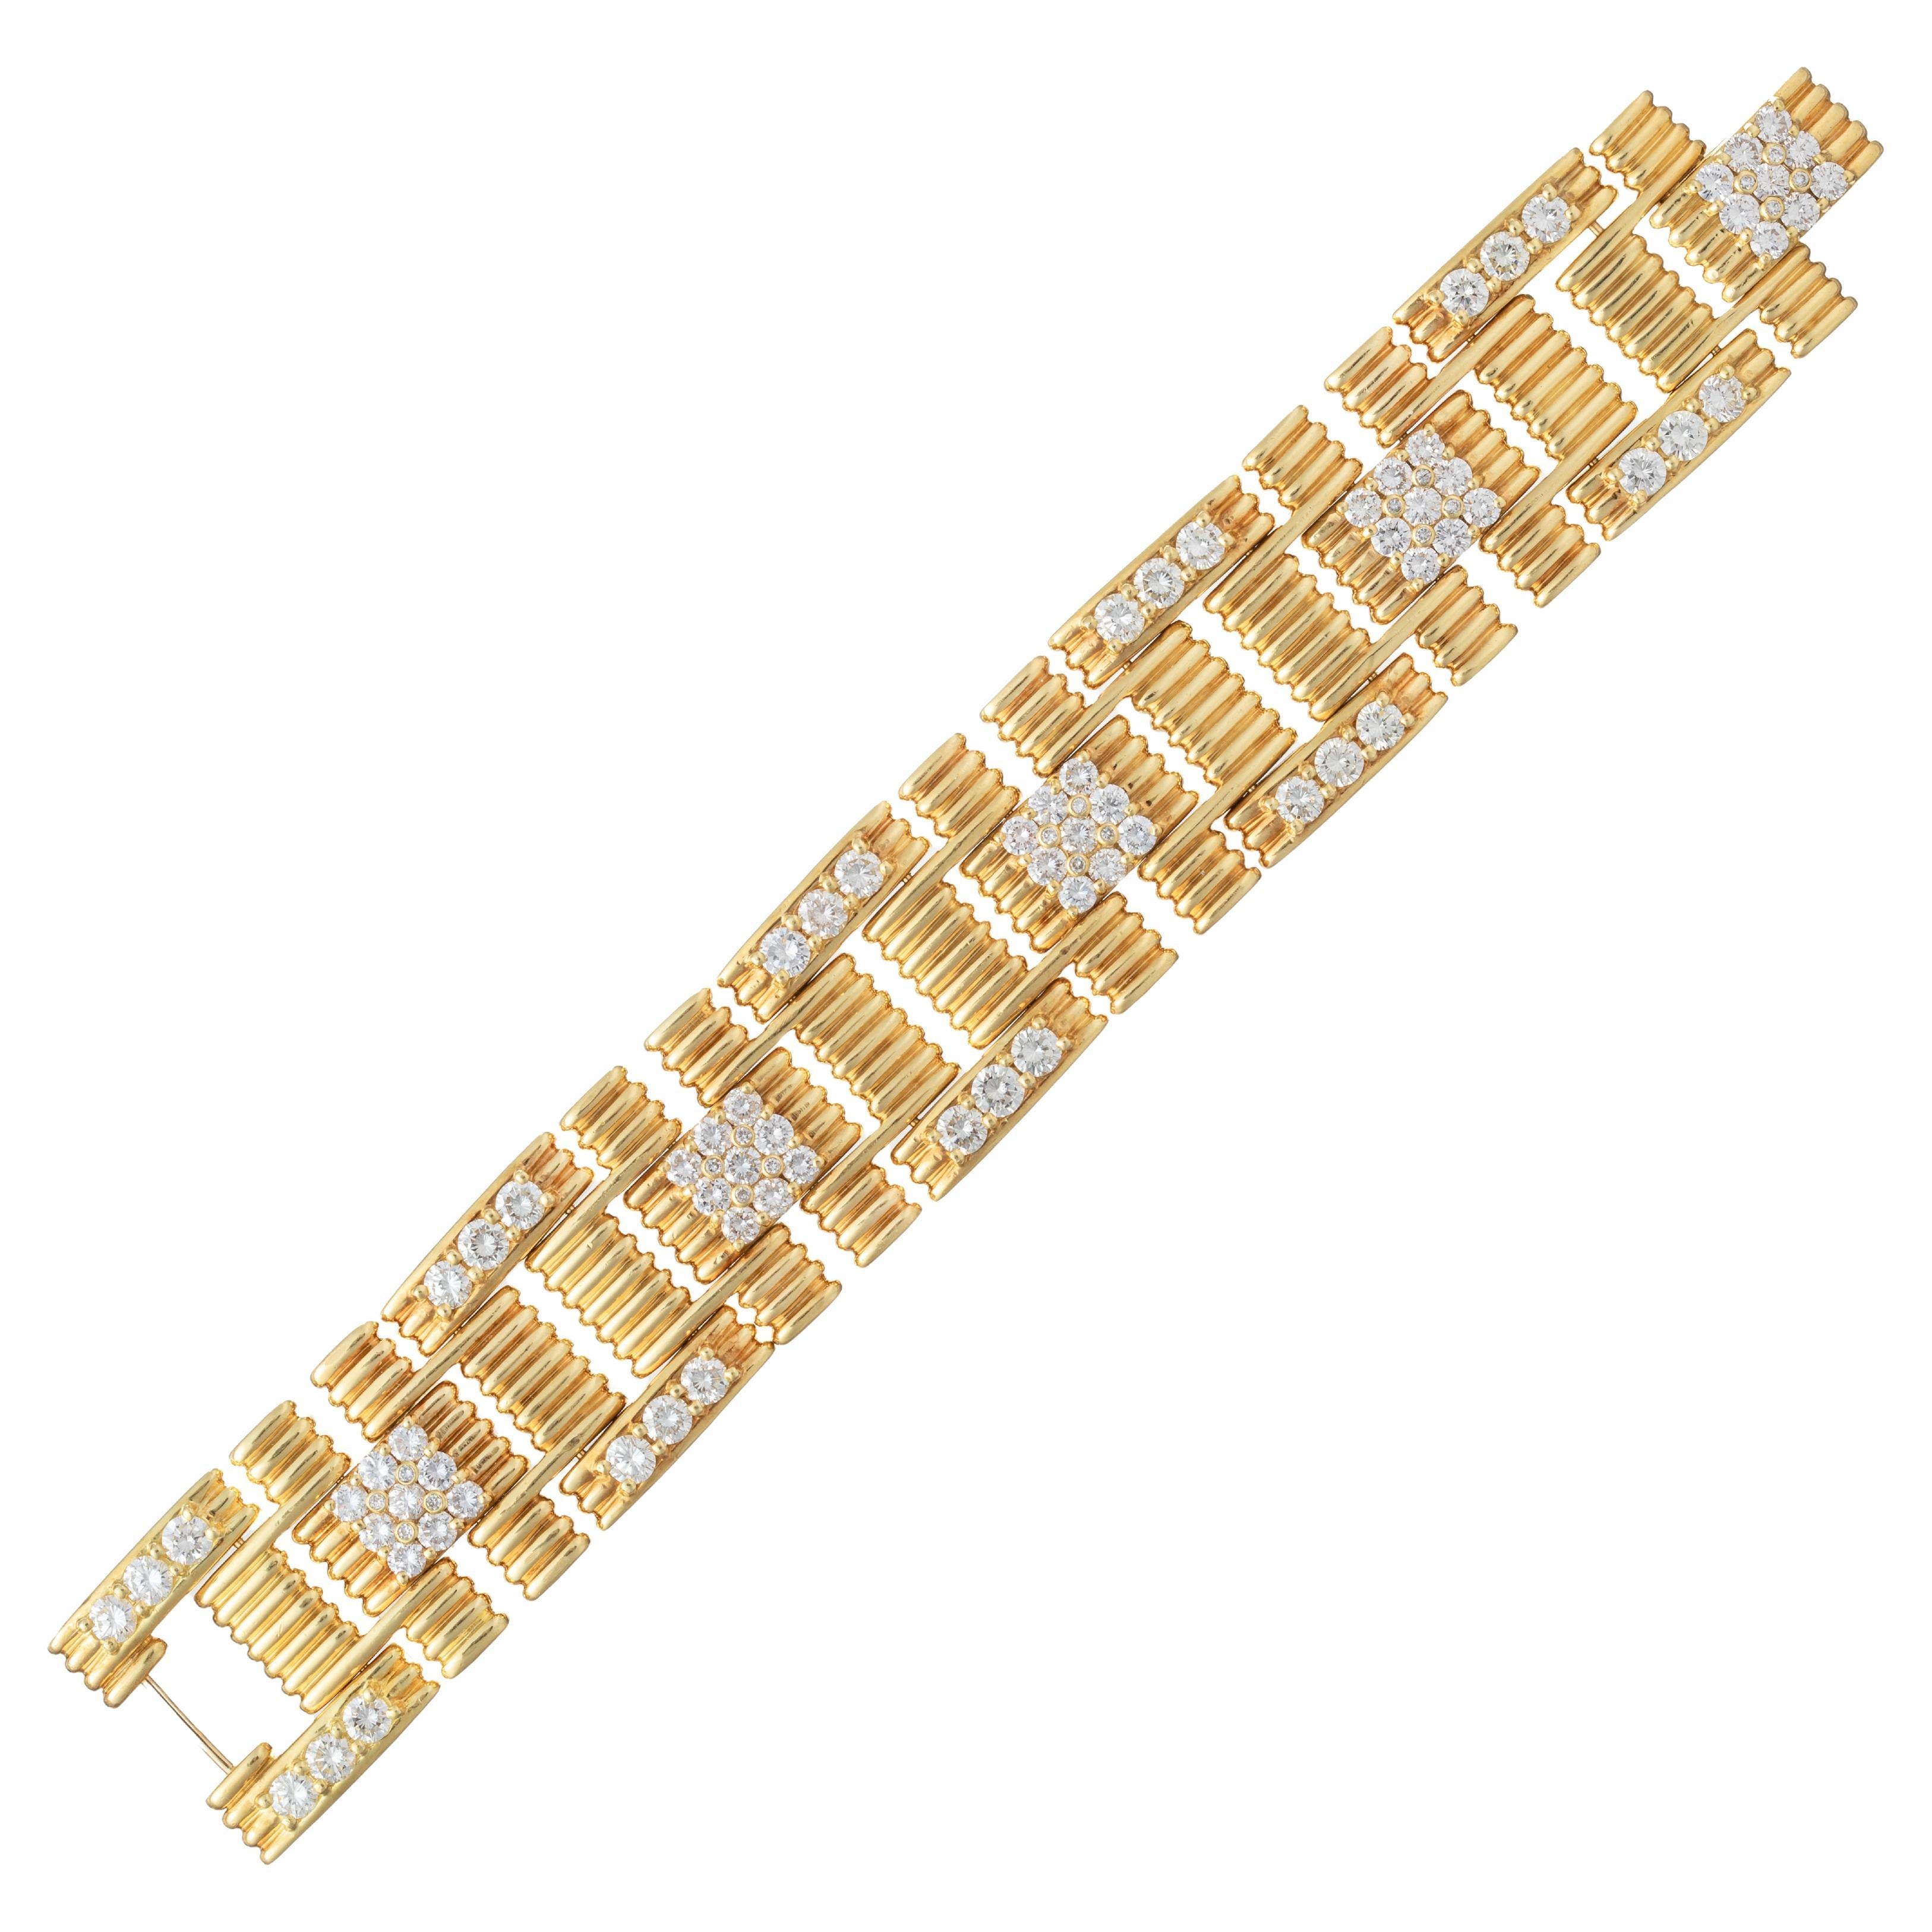 Jose Hess vintage link bracelet, featuring ridged square and rectangular-shaped links in 18k yellow gold accented by near-colorless round-cut diamonds. Diamonds weighing approximately 9.58 total carats (G-I color, VS2-SI1 clarity). Signed 'JOSE